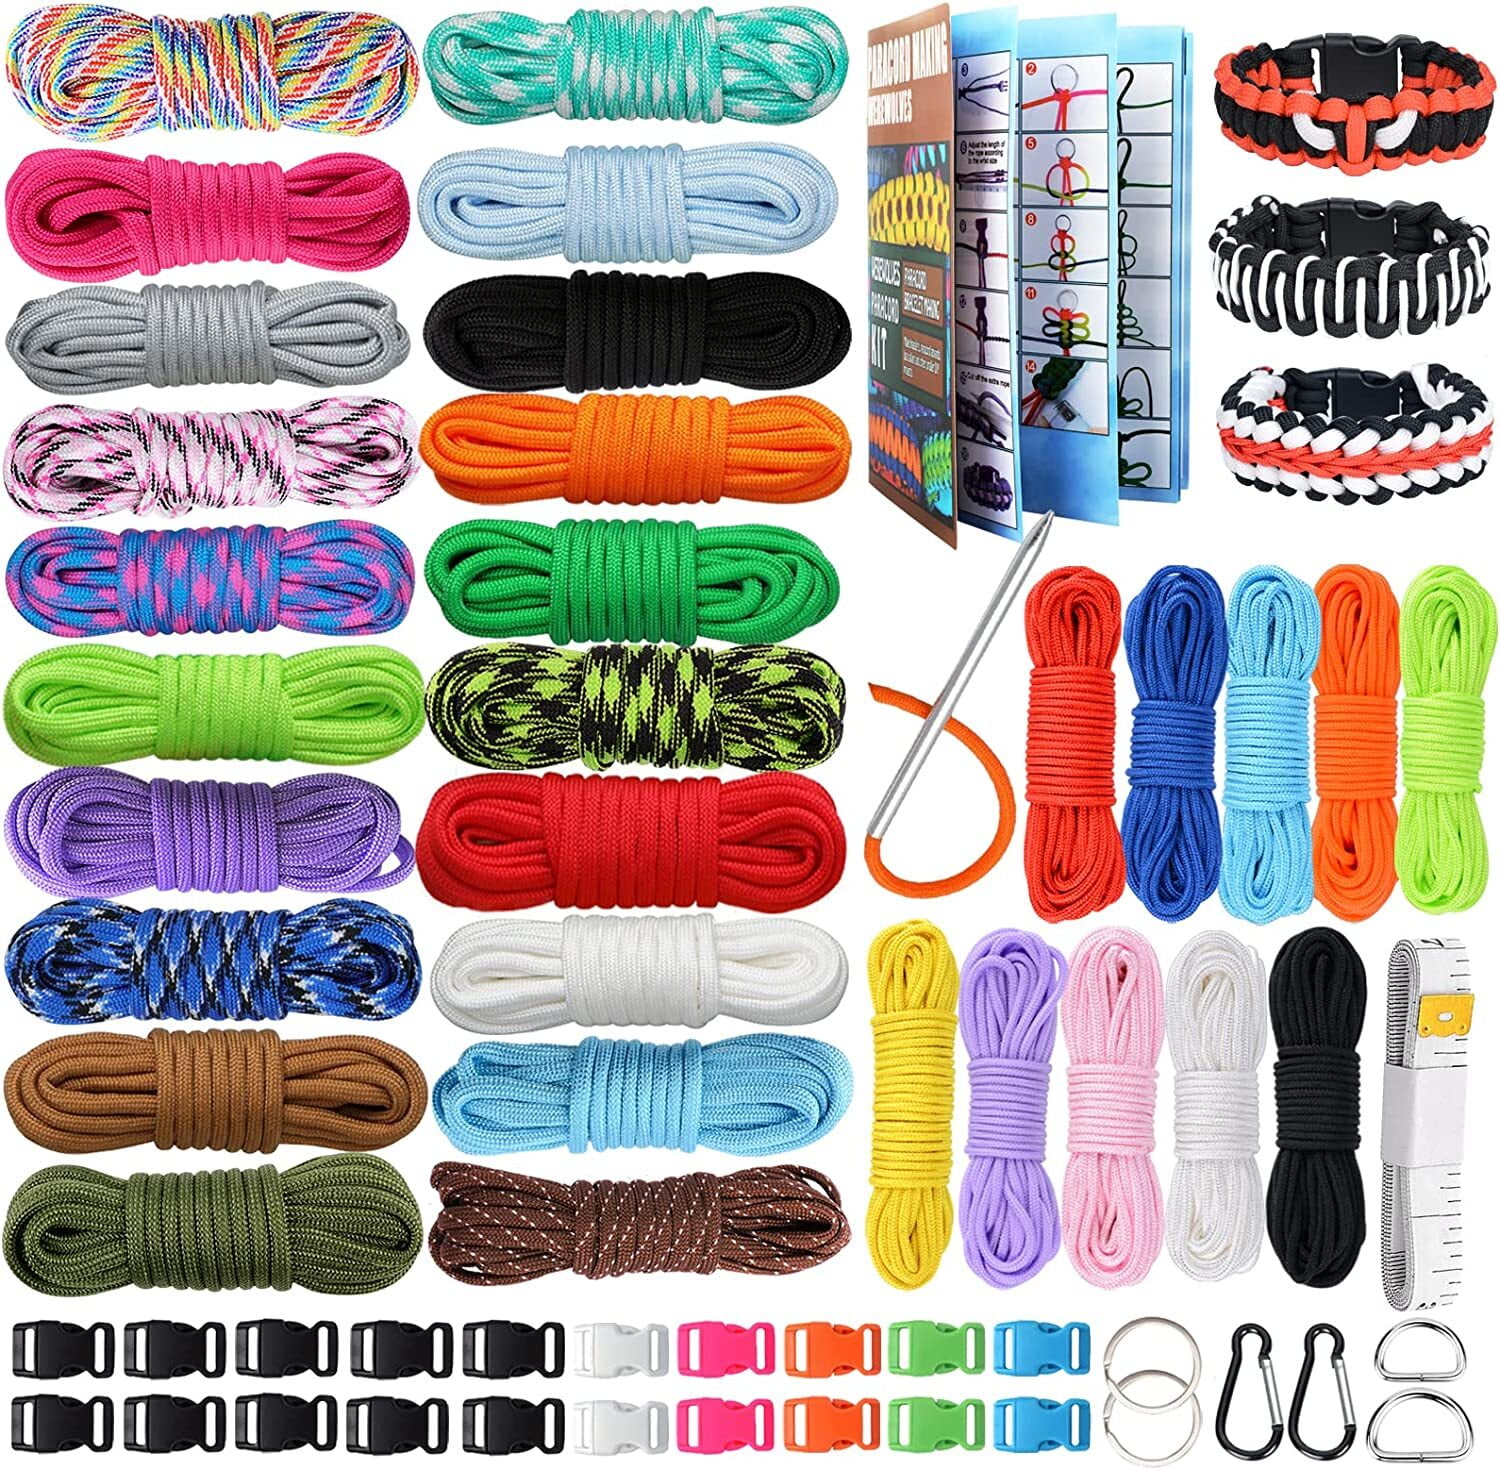 GNILLKO Paracord Bracelet Kit, 40 Colors 10 Feet 550 Paracord Kit and Complete Accessories, Paracord Rope Kit for Making Paracord Bracelets